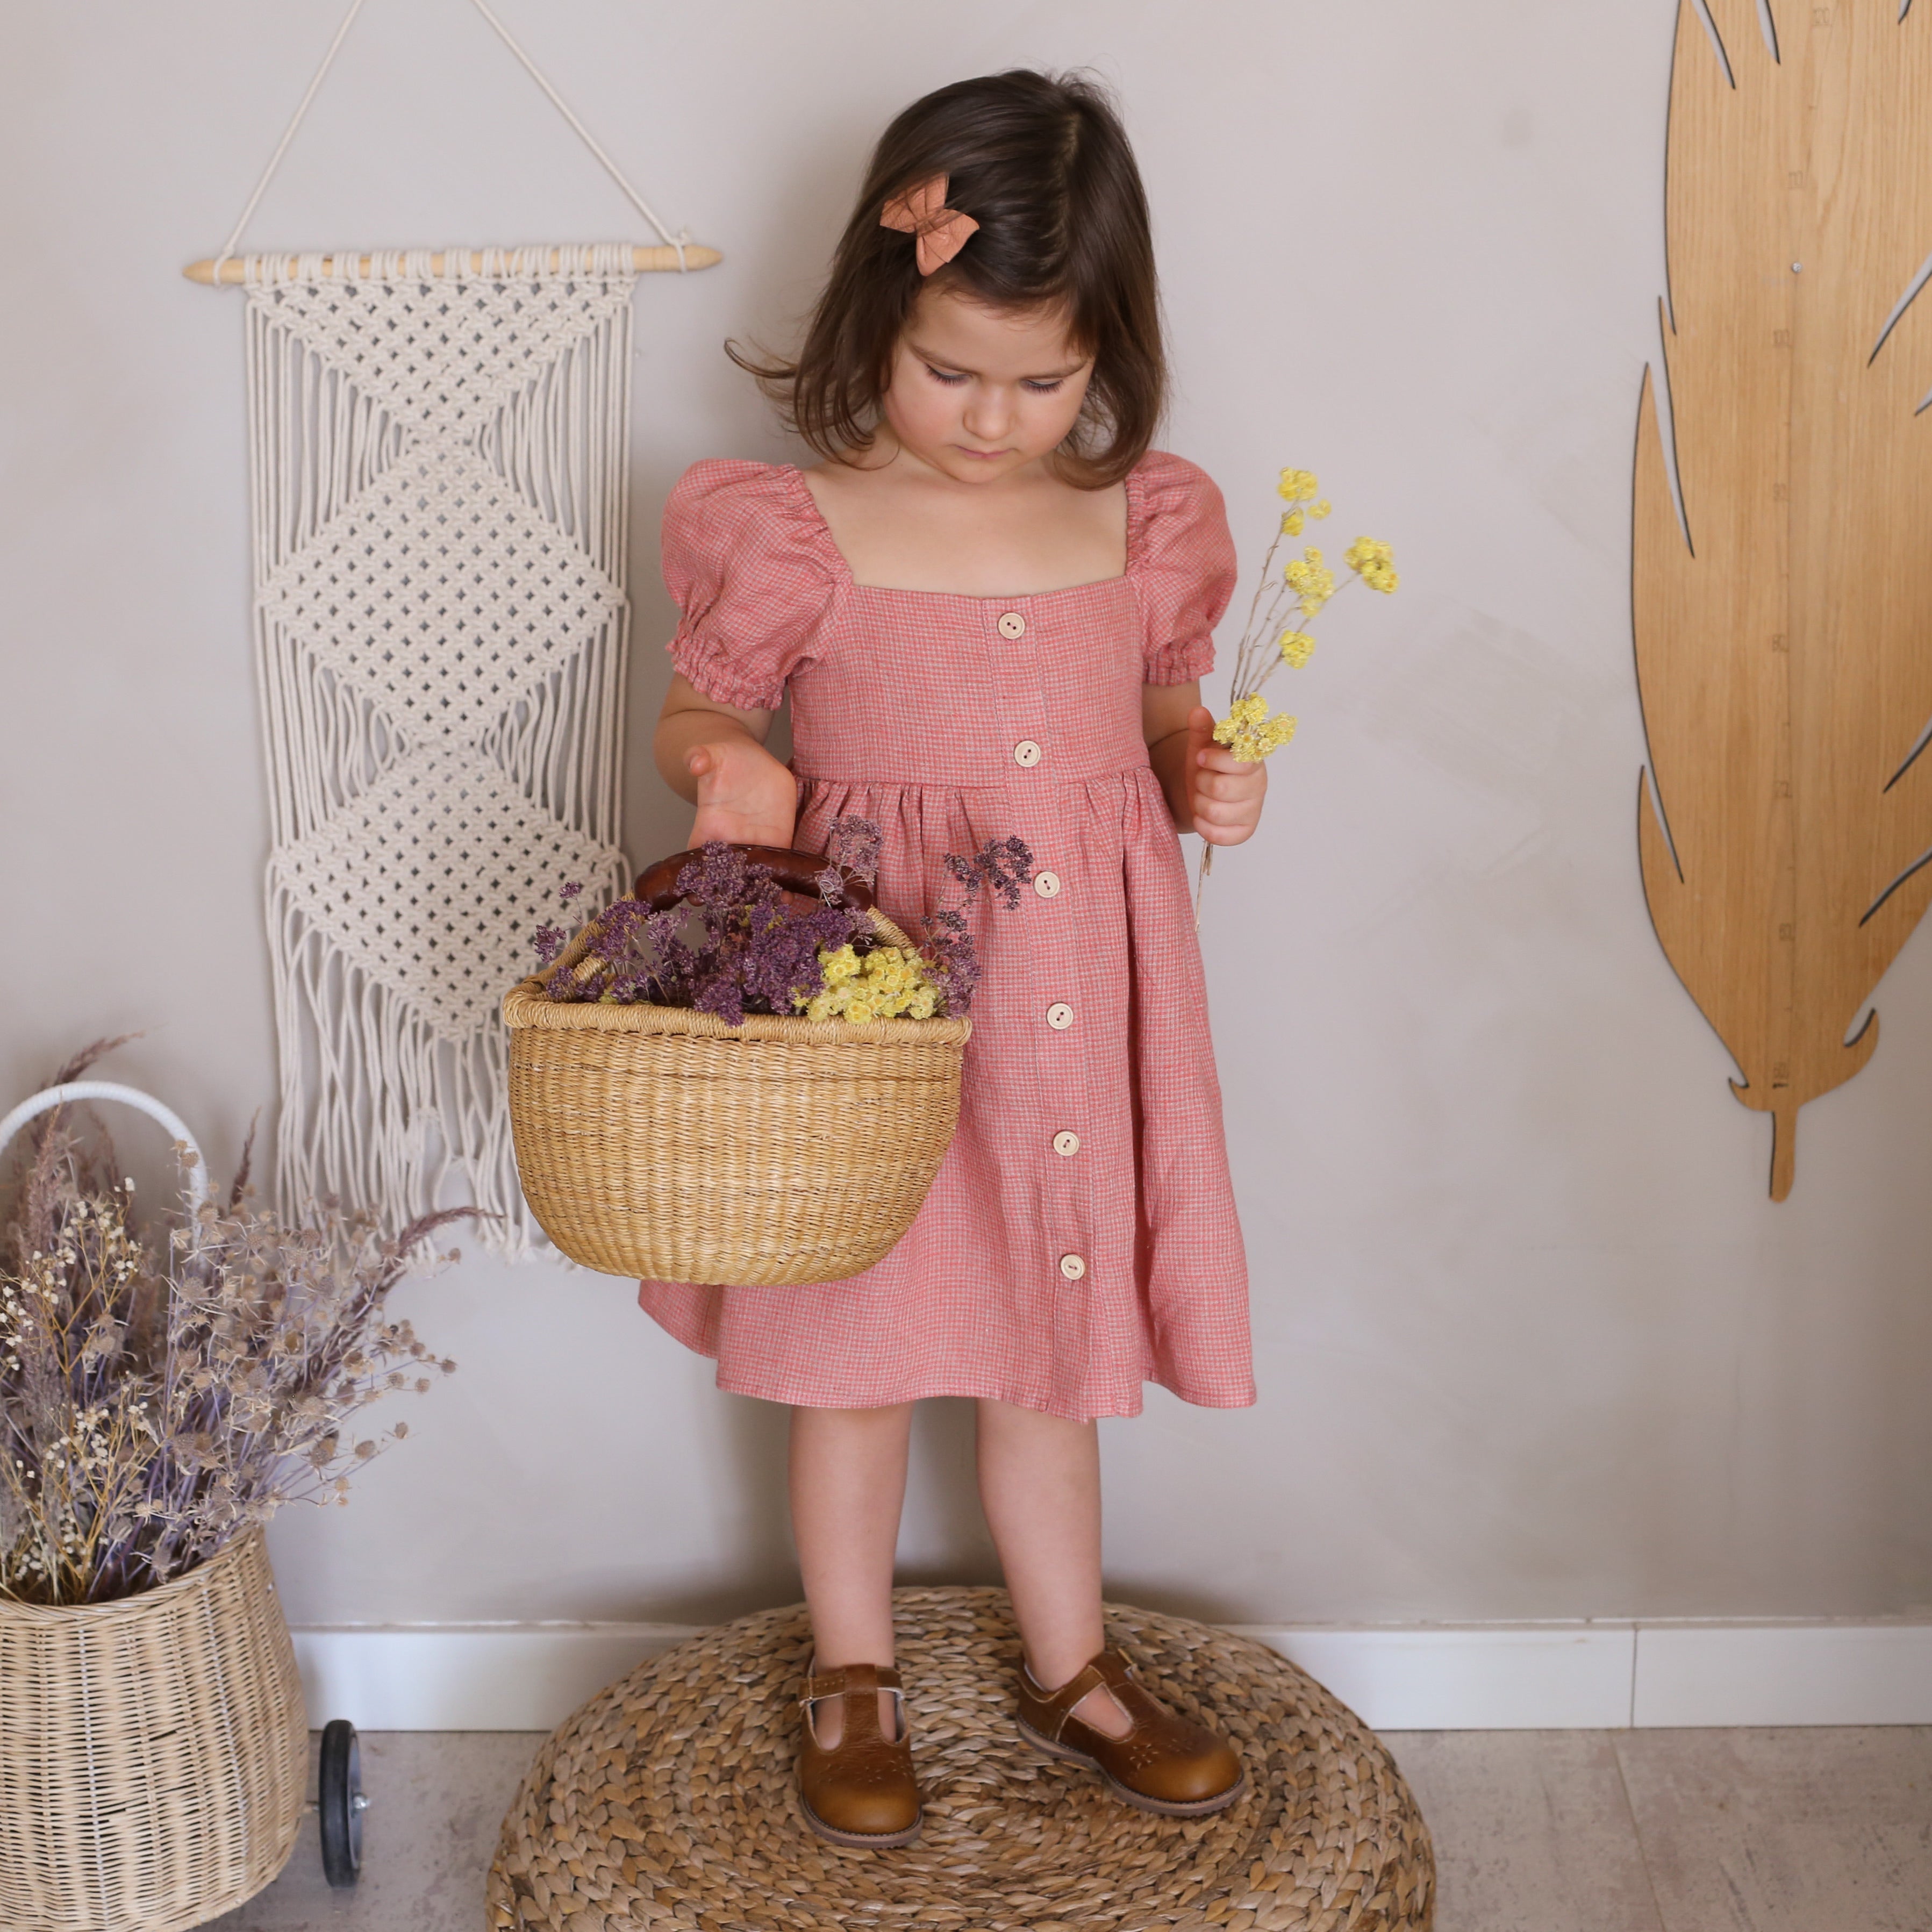 Amber Linen Button-Front Dress with Puff Sleeve